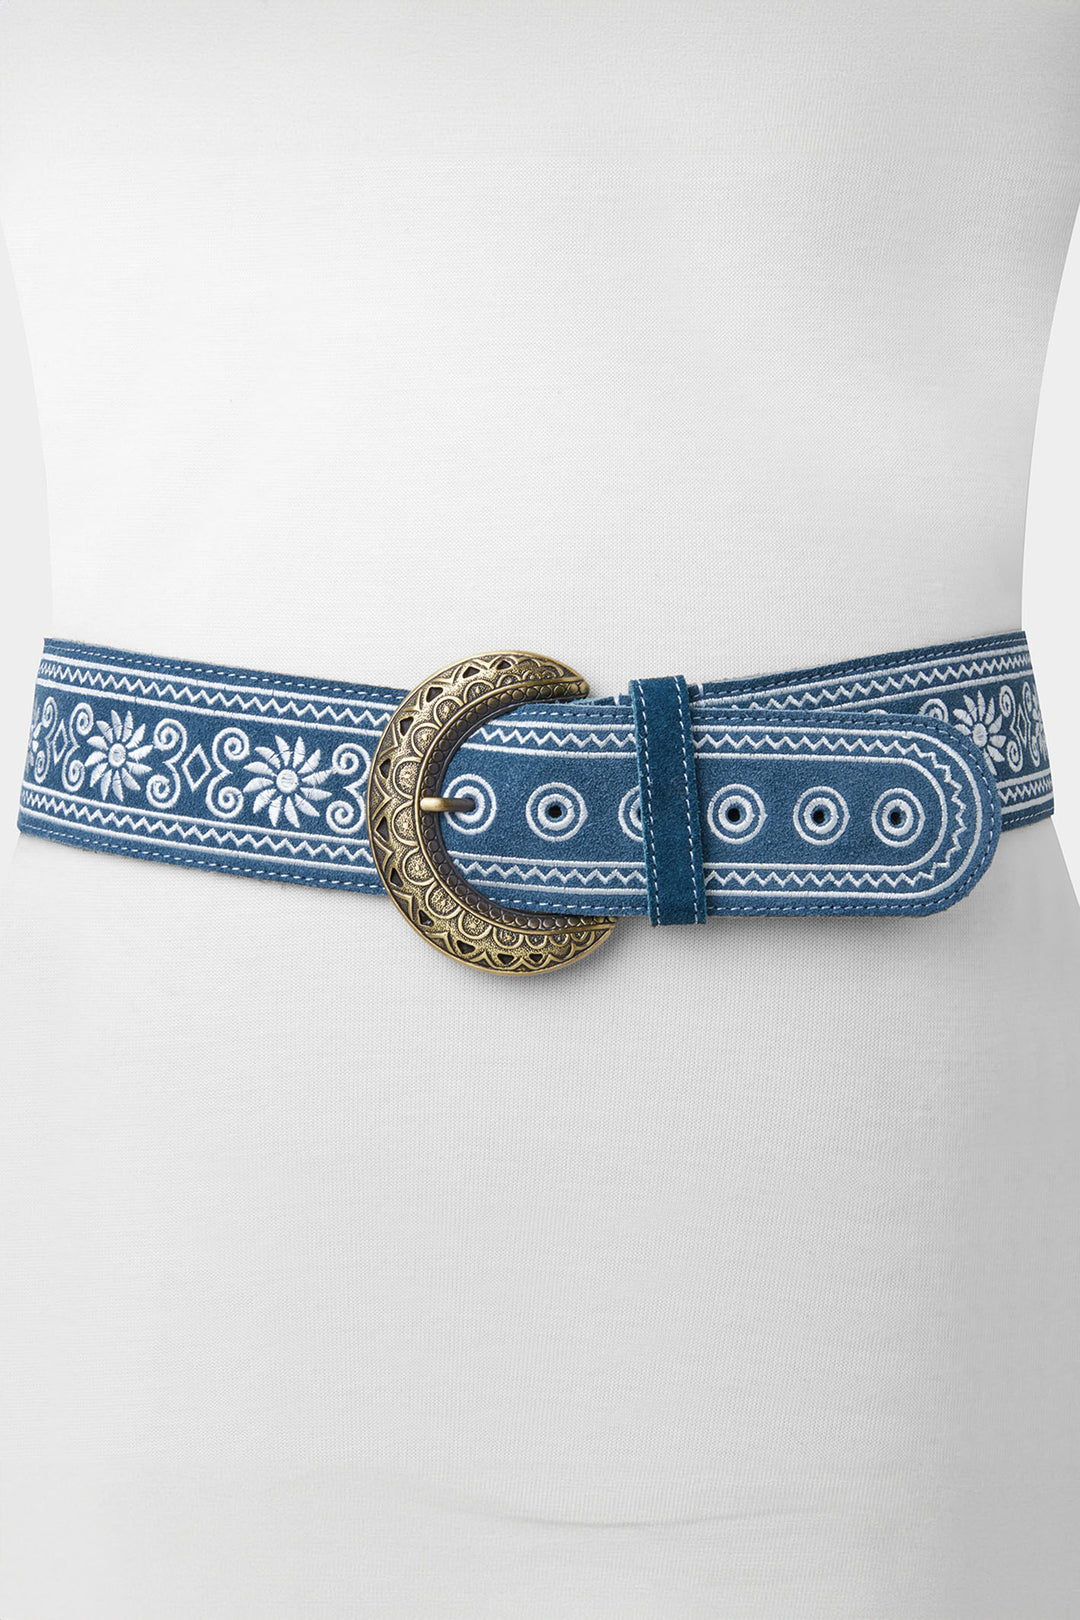 Joe Browns HB399A Into The Blues Embroidered Leather Suede Belt - Experience Boutique